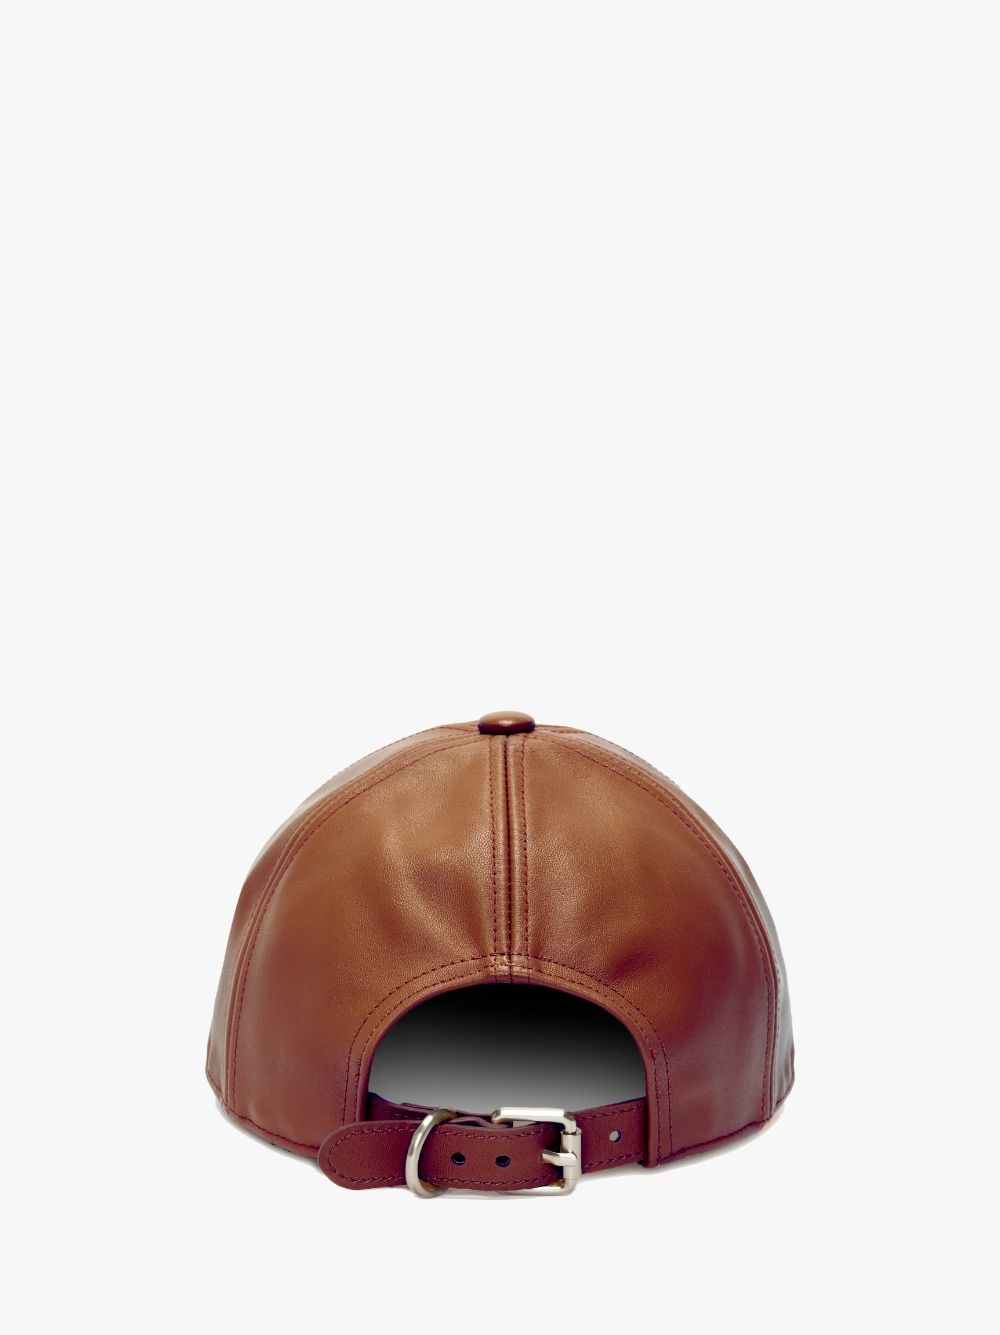 LEATHER BASEBALL CAP WITH ANCHOR LOGO - 3